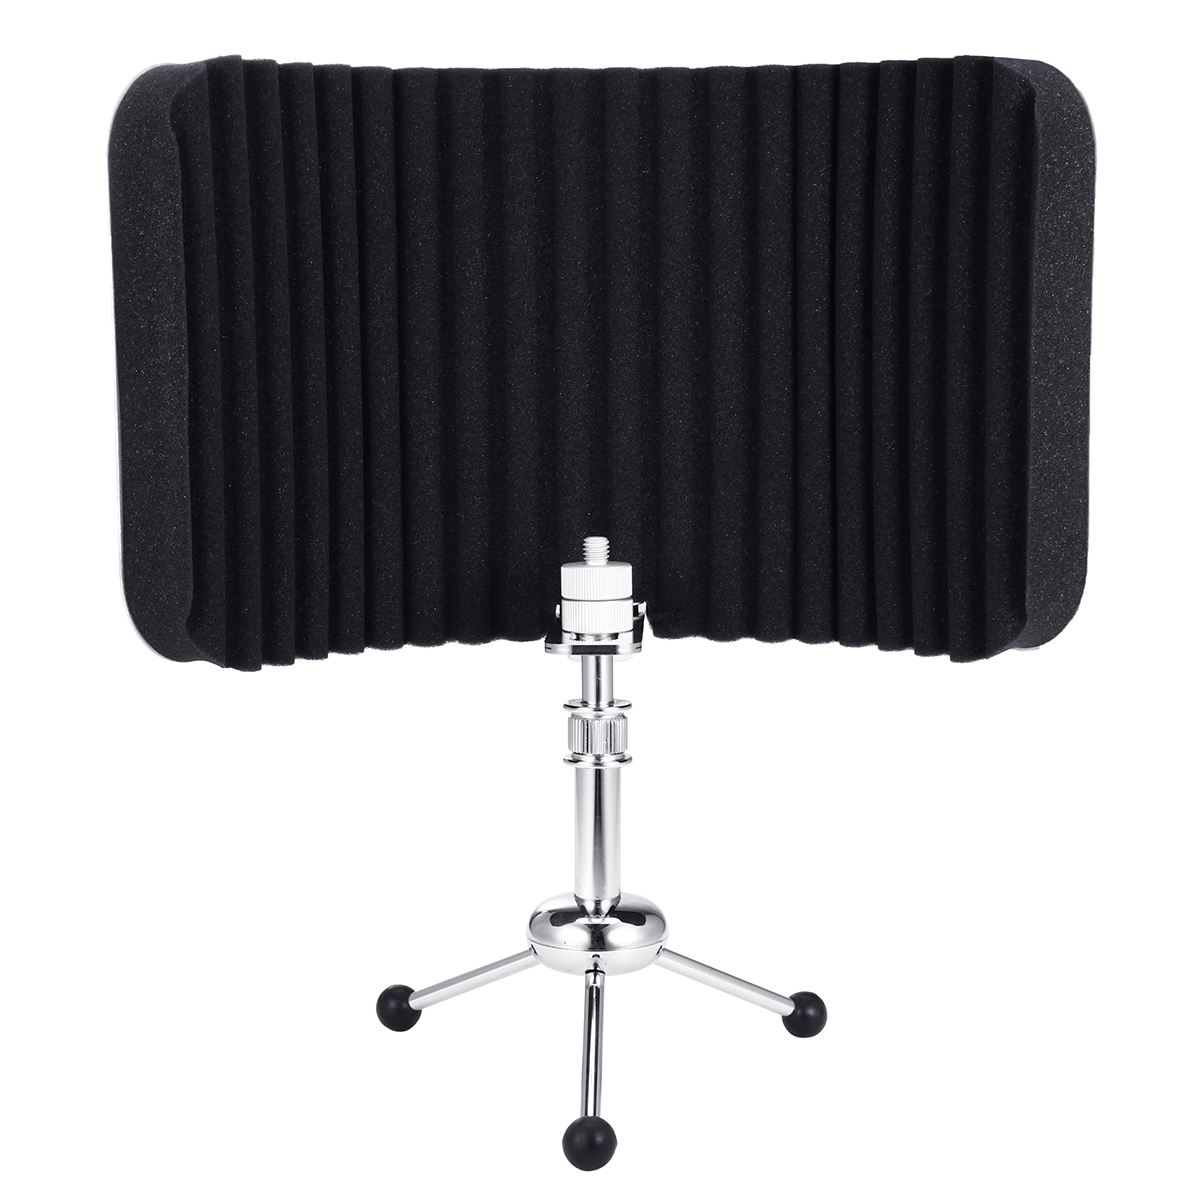 Alctron-Microphone-Acoustic-Isolation-Shield-Absorber-Filter-Vocal-Wind-Screen-1366364